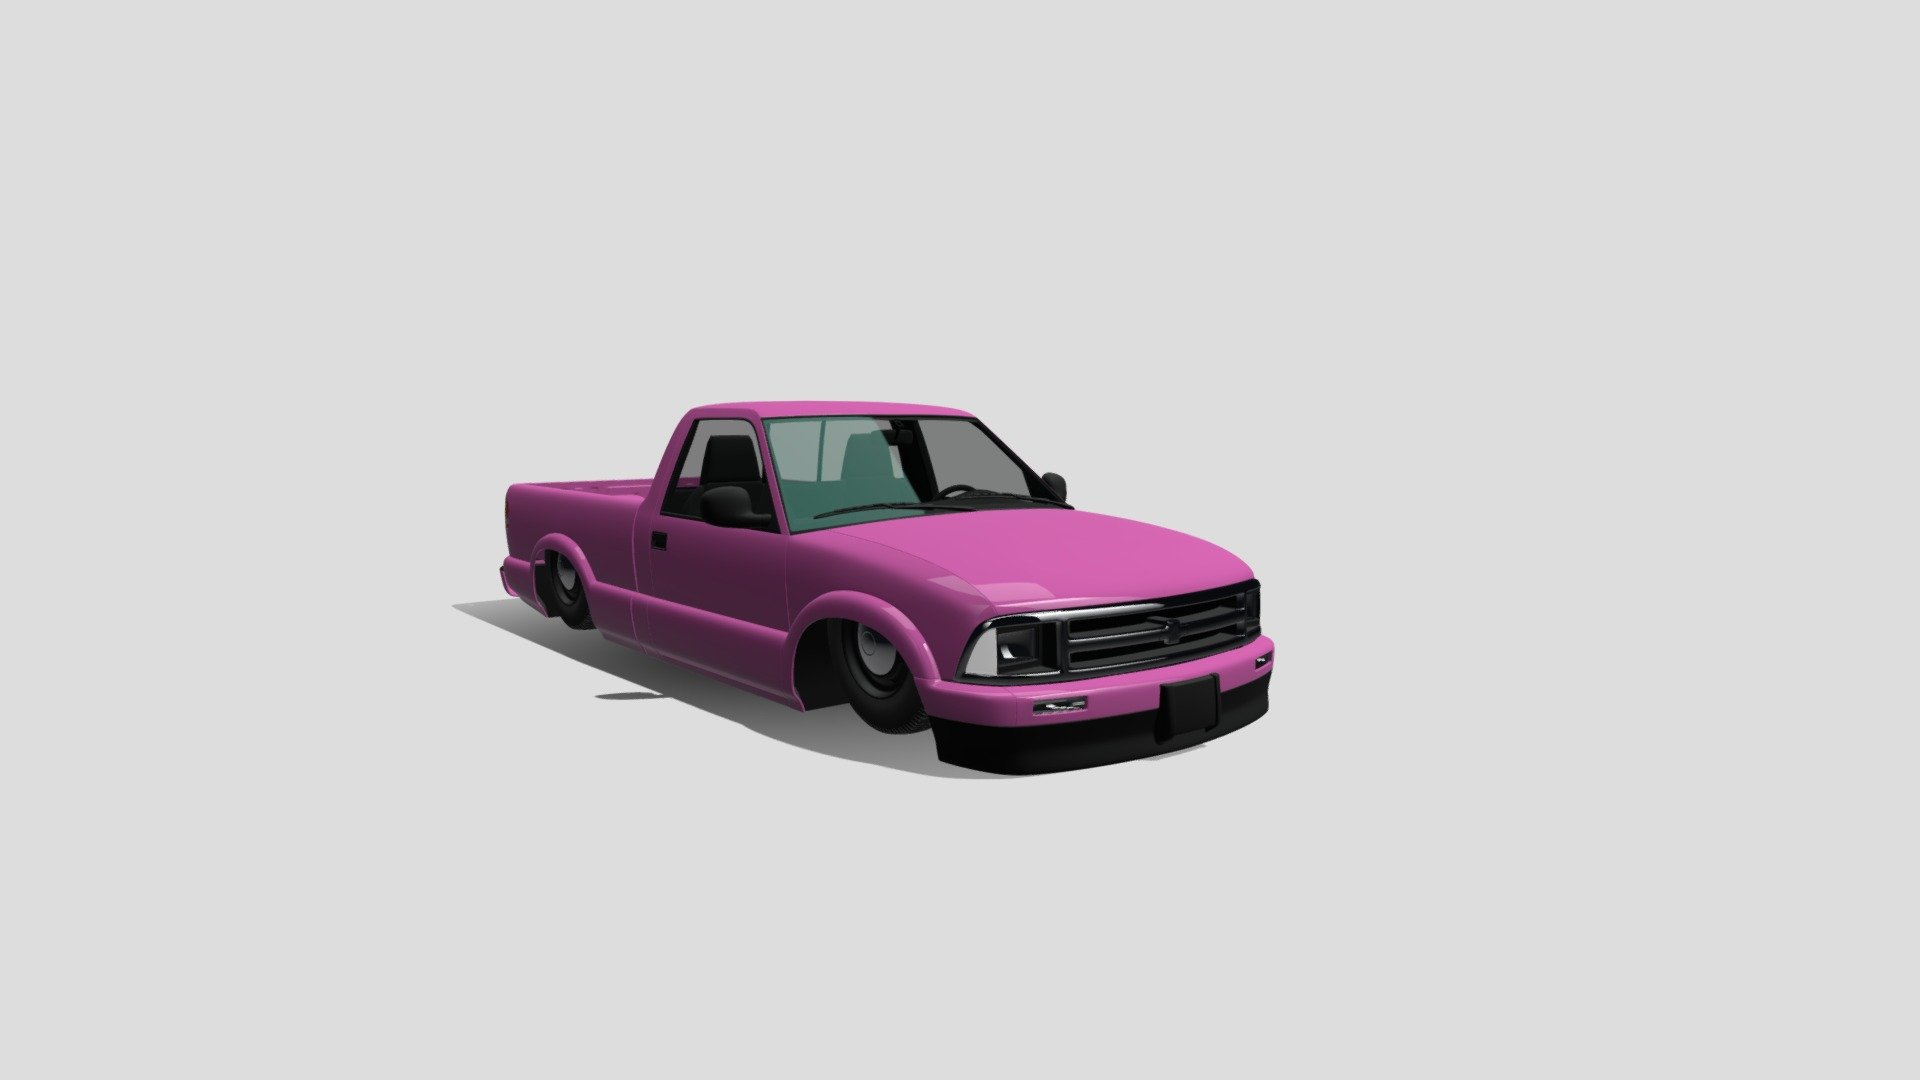 Air ride suspension puts this S-10 in the dirt 3d model